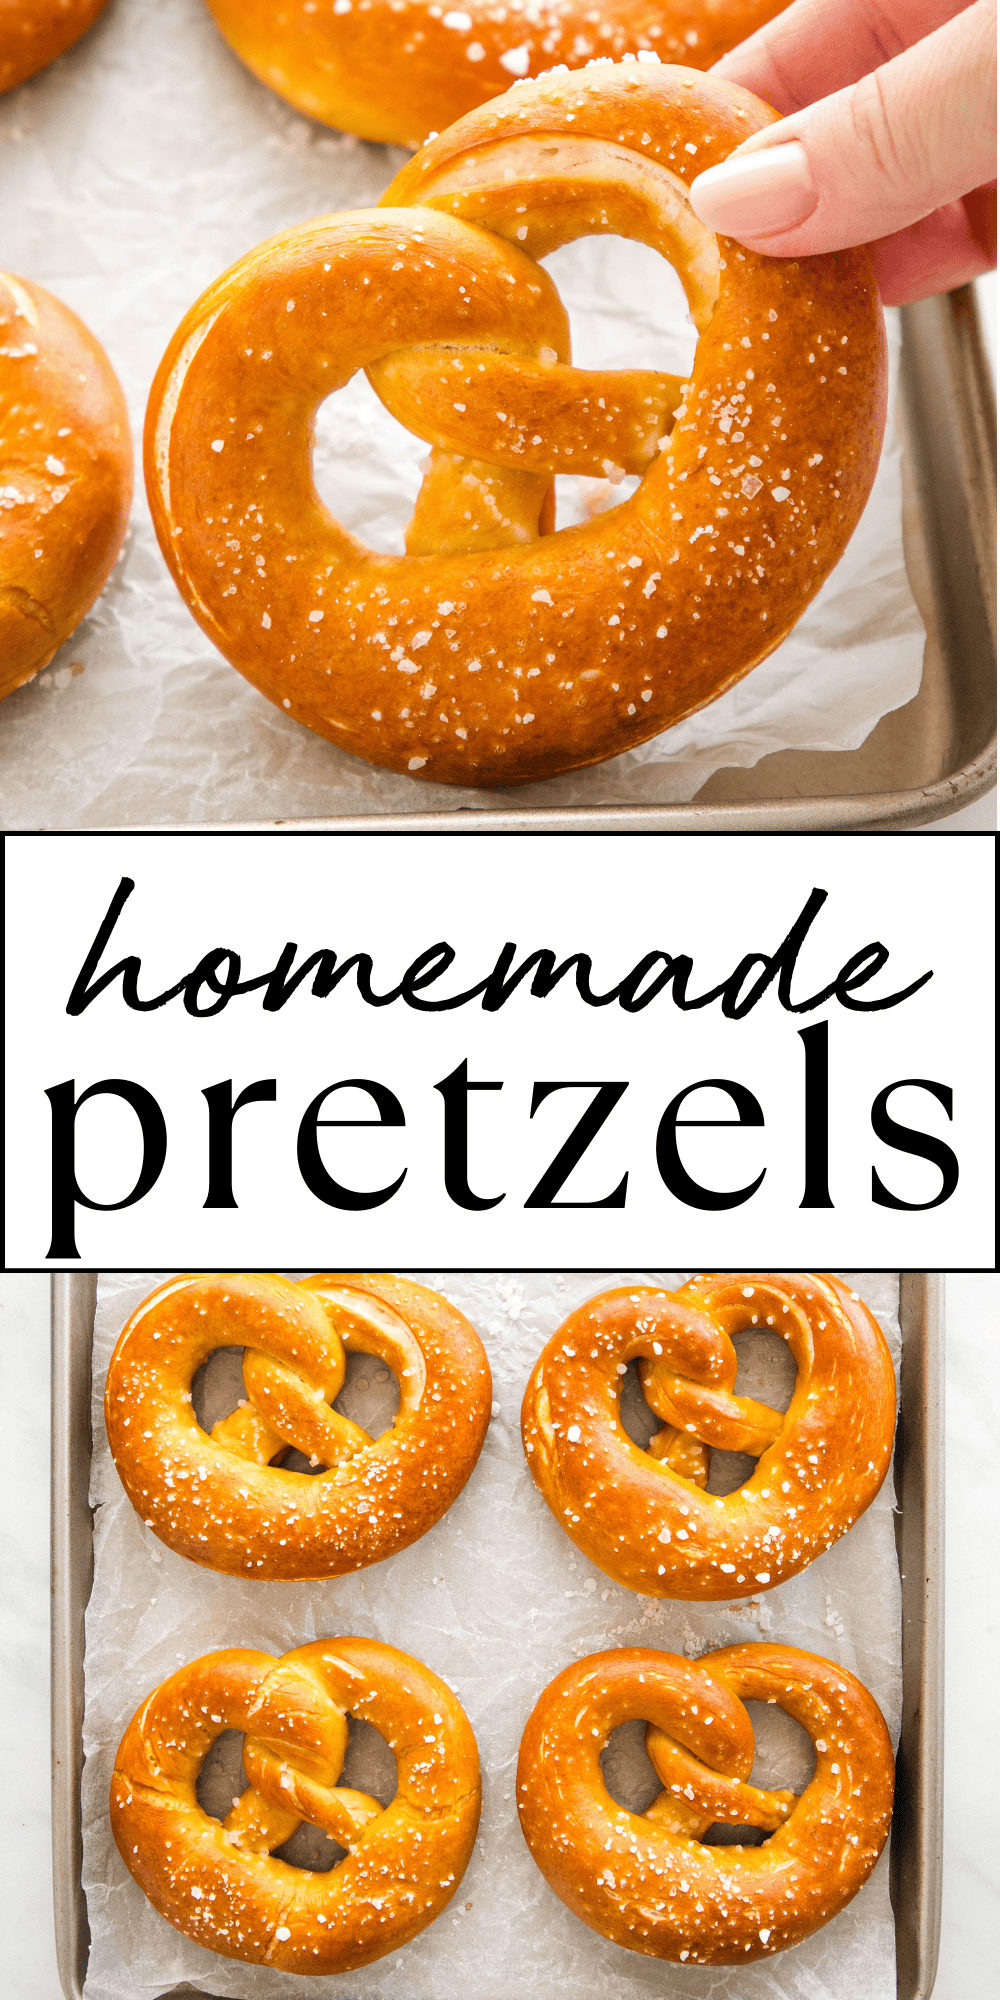 This Pretzels recipe is the ultimate guide to chewy German-style soft pretzels. Make this soft pretzel recipe with basic ingredients and our pro tips and tricks - no lye required! Recipe from thebusybaker.ca! #softpretzels #pretzels #pretzelrecipe #softpretzelrecipe #howtomakesoftpretzels #howtomakepretzels #germanpretzels via @busybakerblog